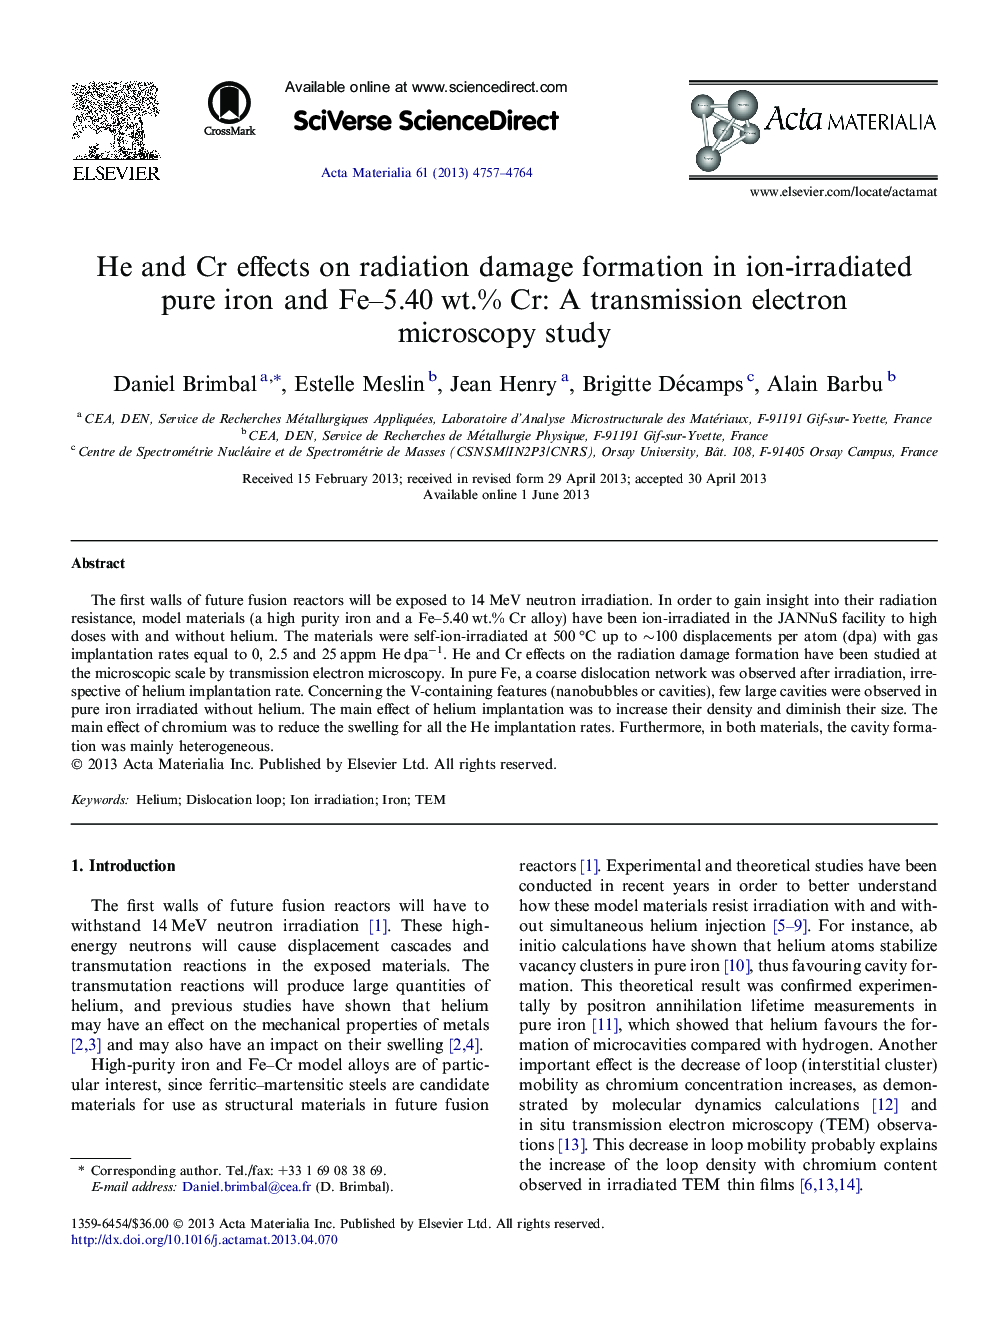 He and Cr effects on radiation damage formation in ion-irradiated pure iron and Fe–5.40 wt.% Cr: A transmission electron microscopy study